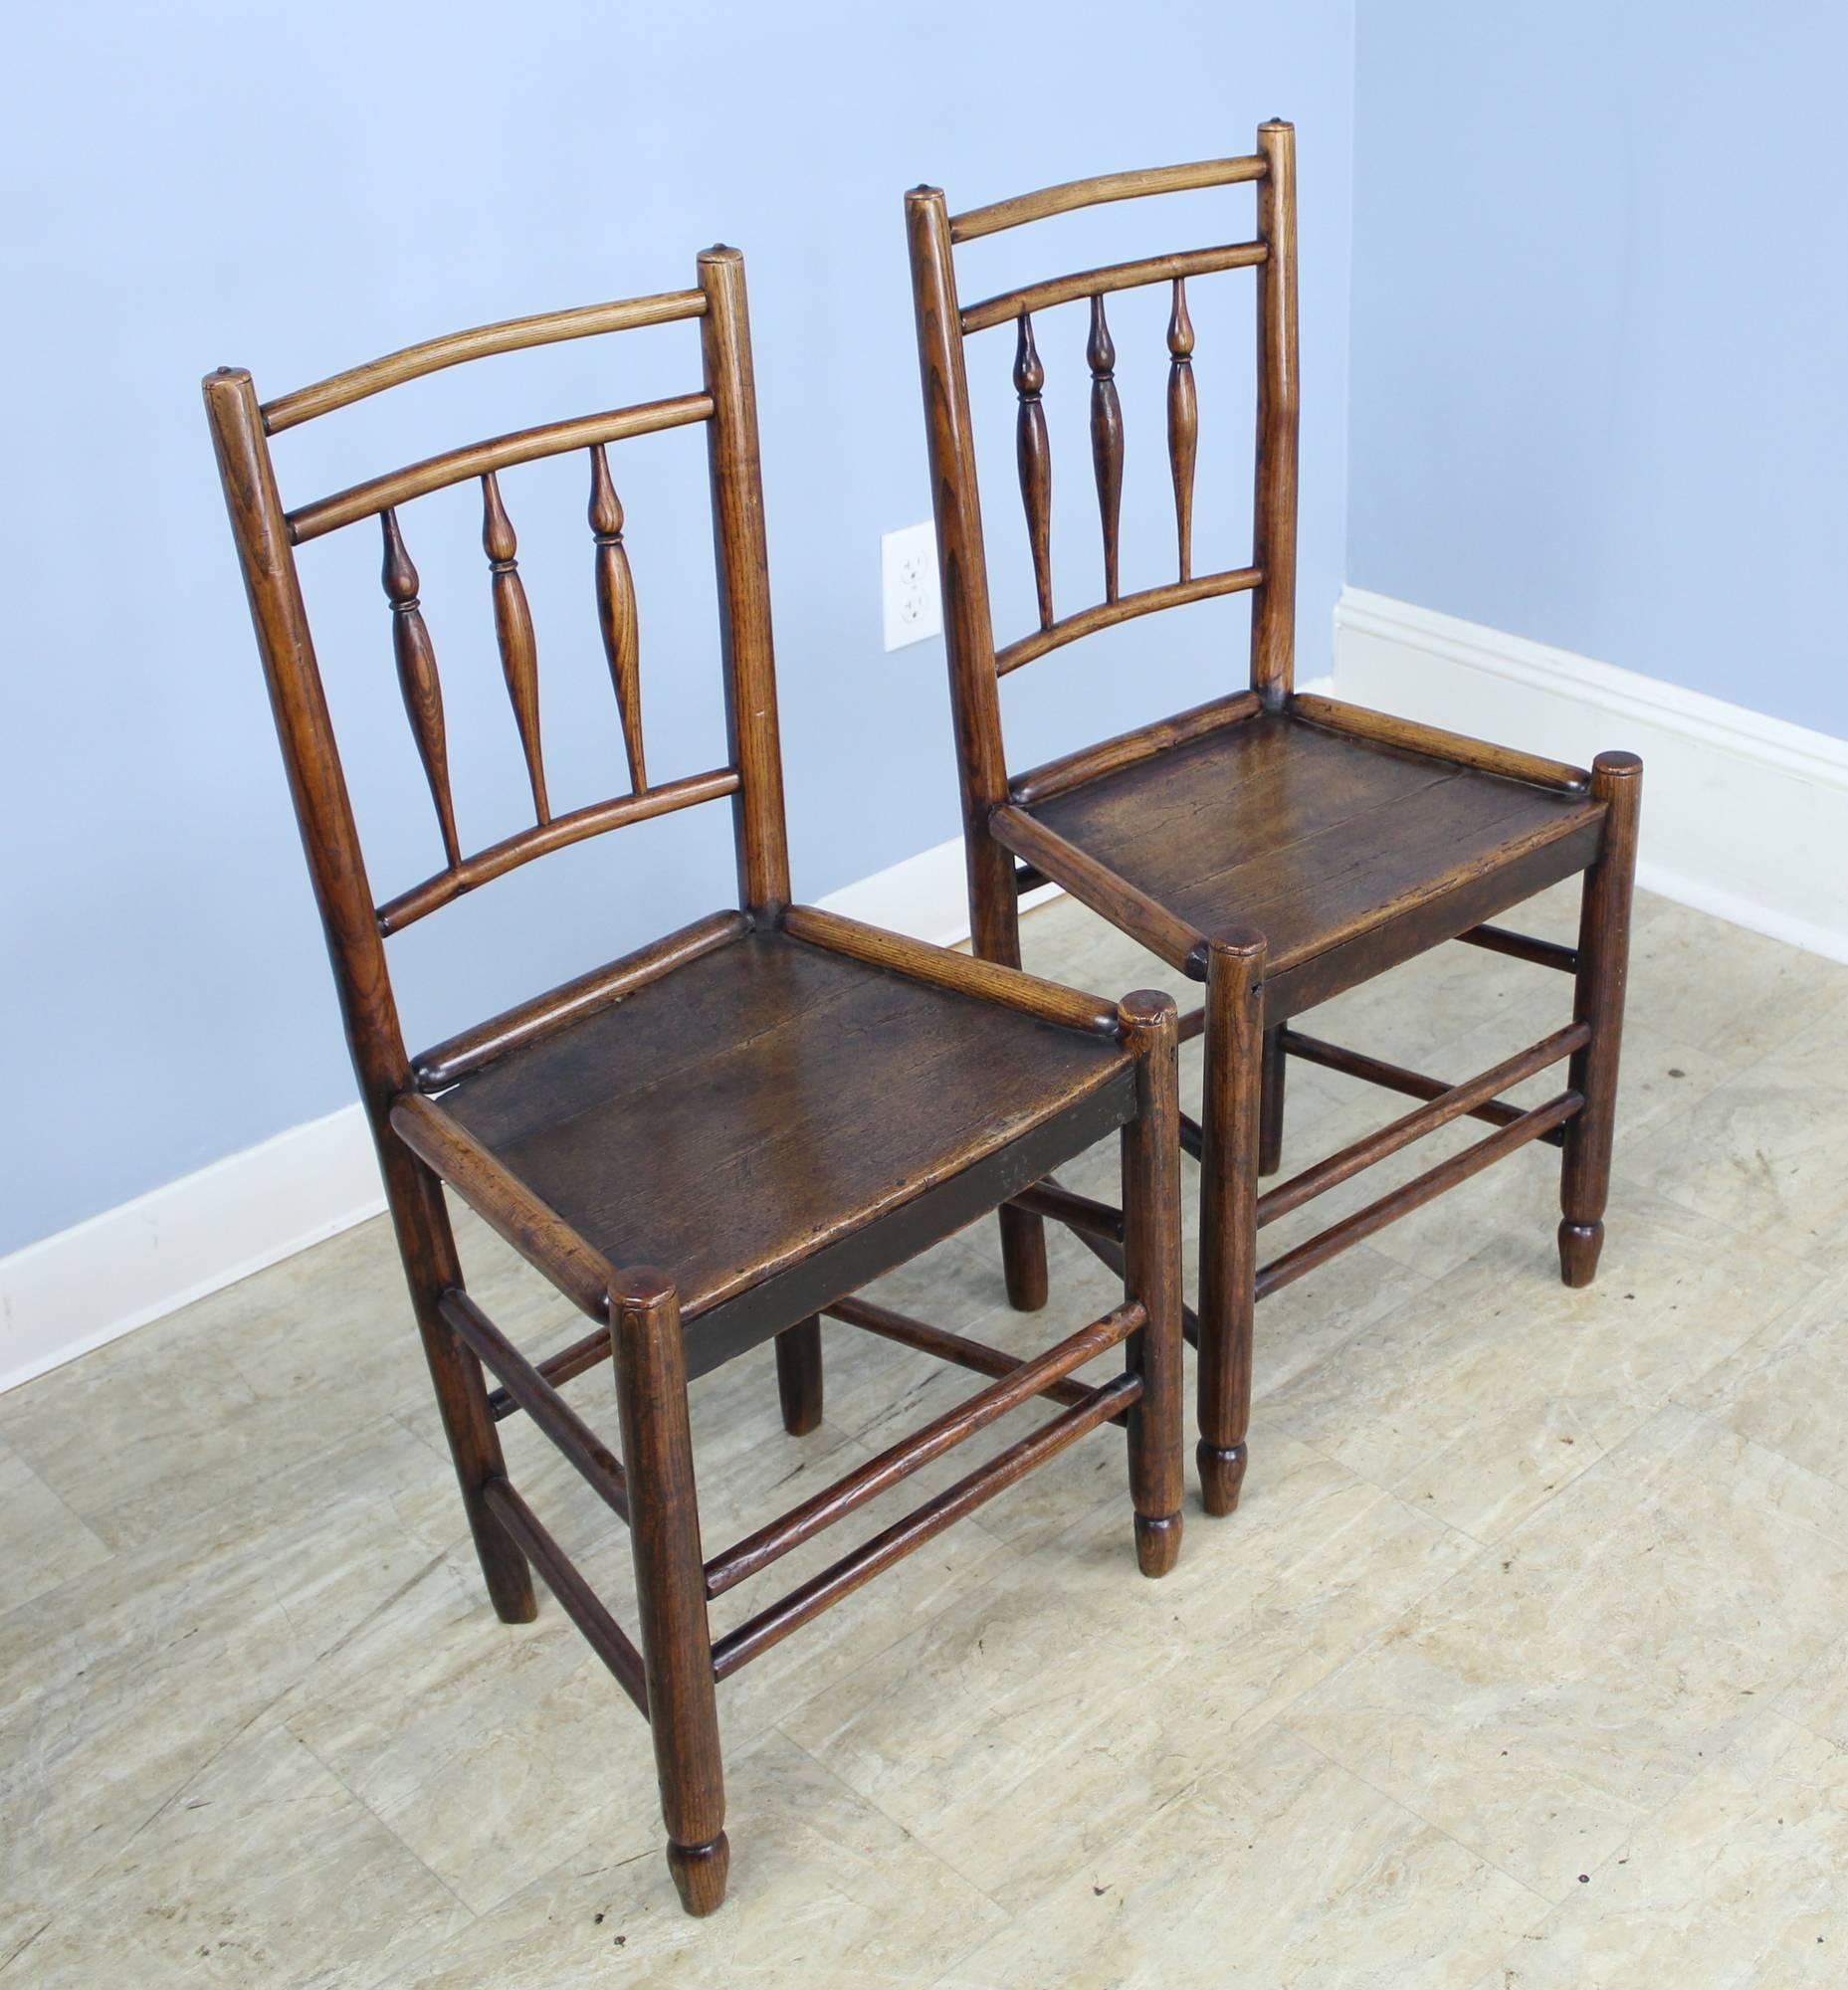 A charming pair of early oak side chairs with delicate spindle backs and double supports. Rich dark oak with lovely patina and articulated edges at the seat, which measures 17 inches high. These chairs are delicate and more decorative than for